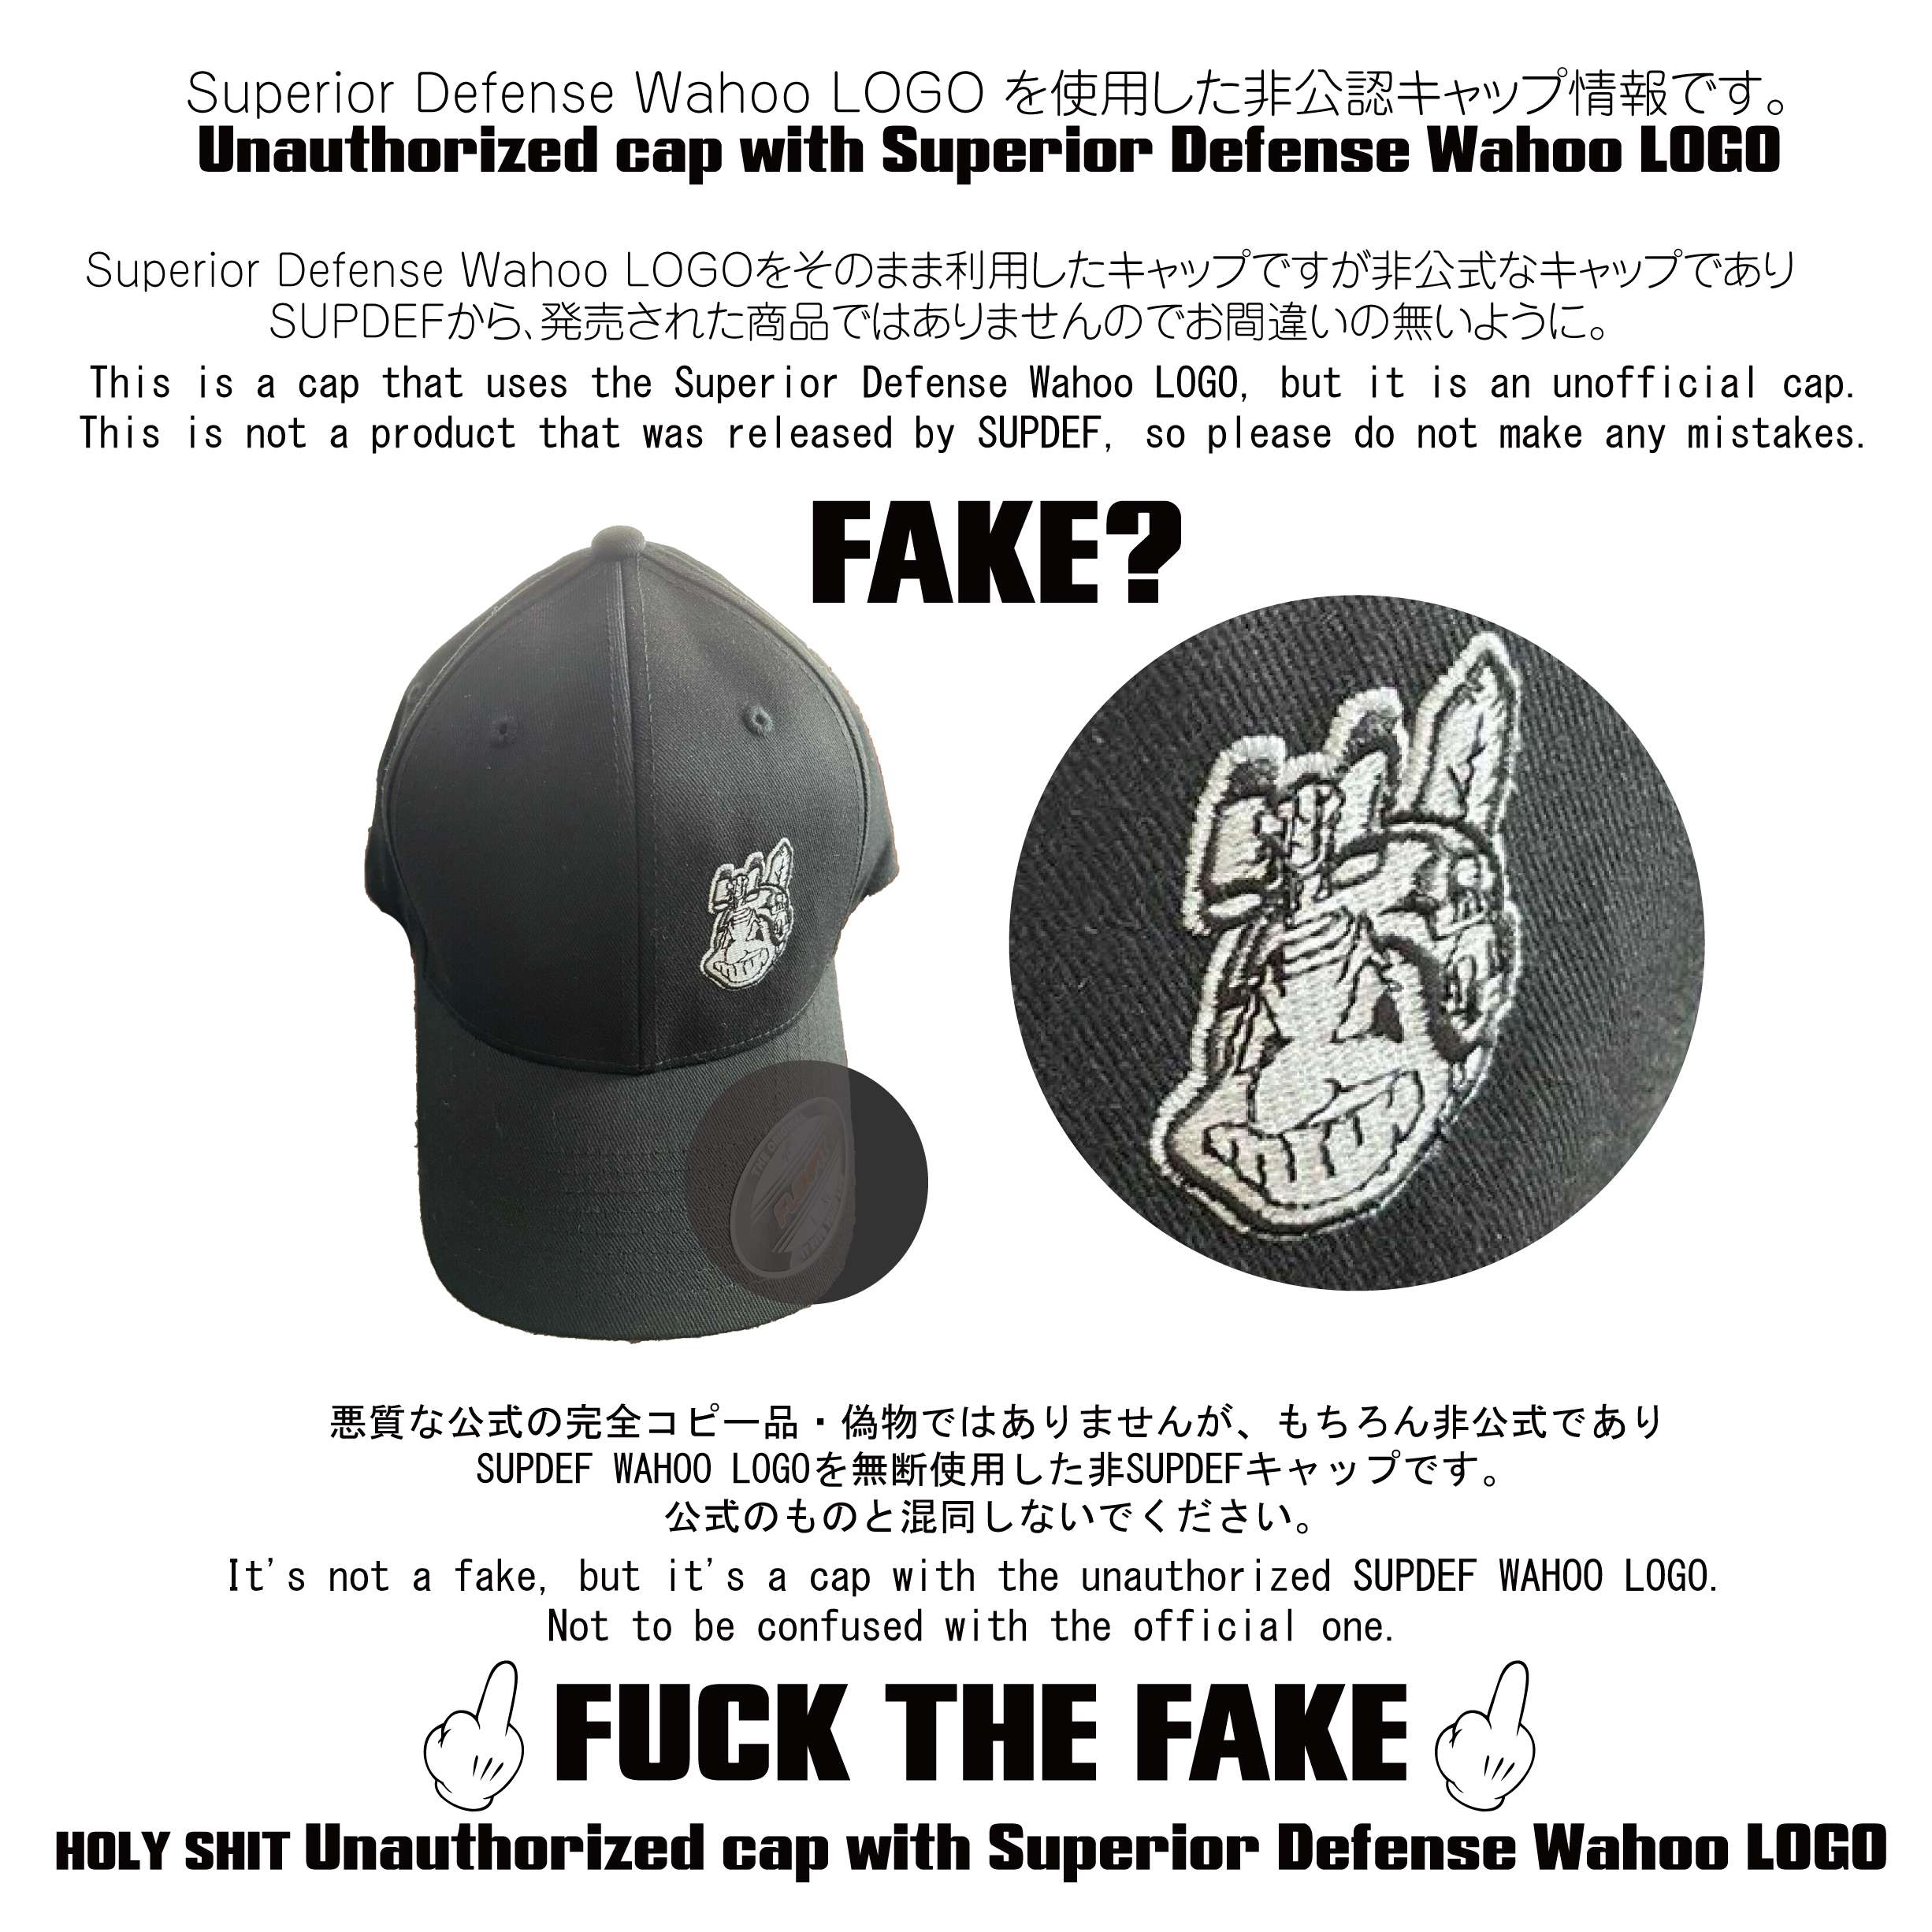 Superior Defense HOLY SHIT Unauthorized cap with SUPDEF Wahoo LOGO REAL or FAKE FUCK THE FAKE